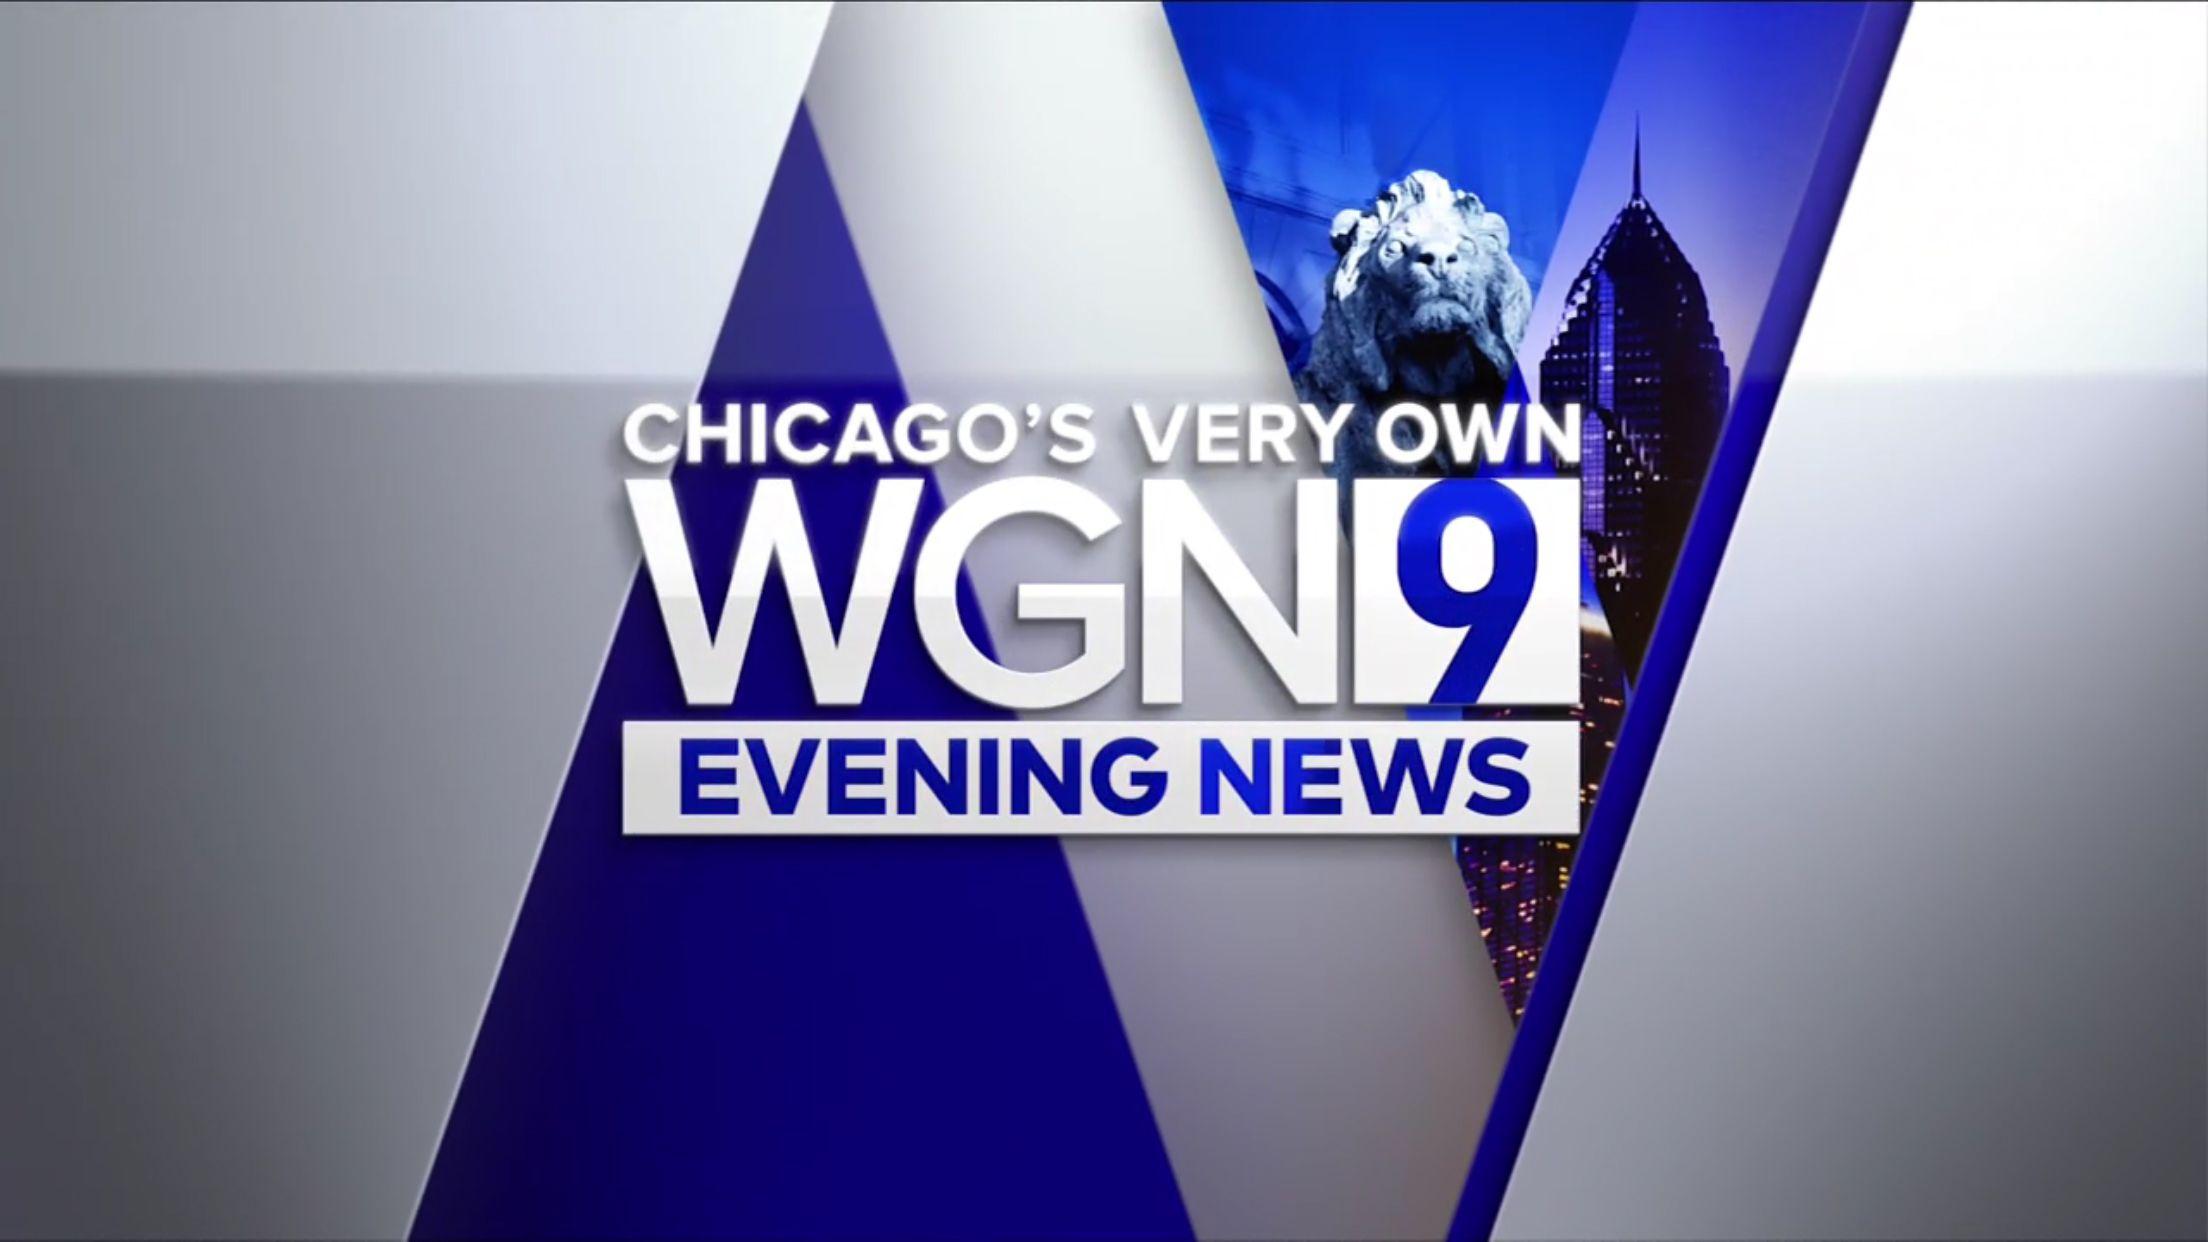 WGN Chicago Logo - Chicago's very own' draws on city for inspiration